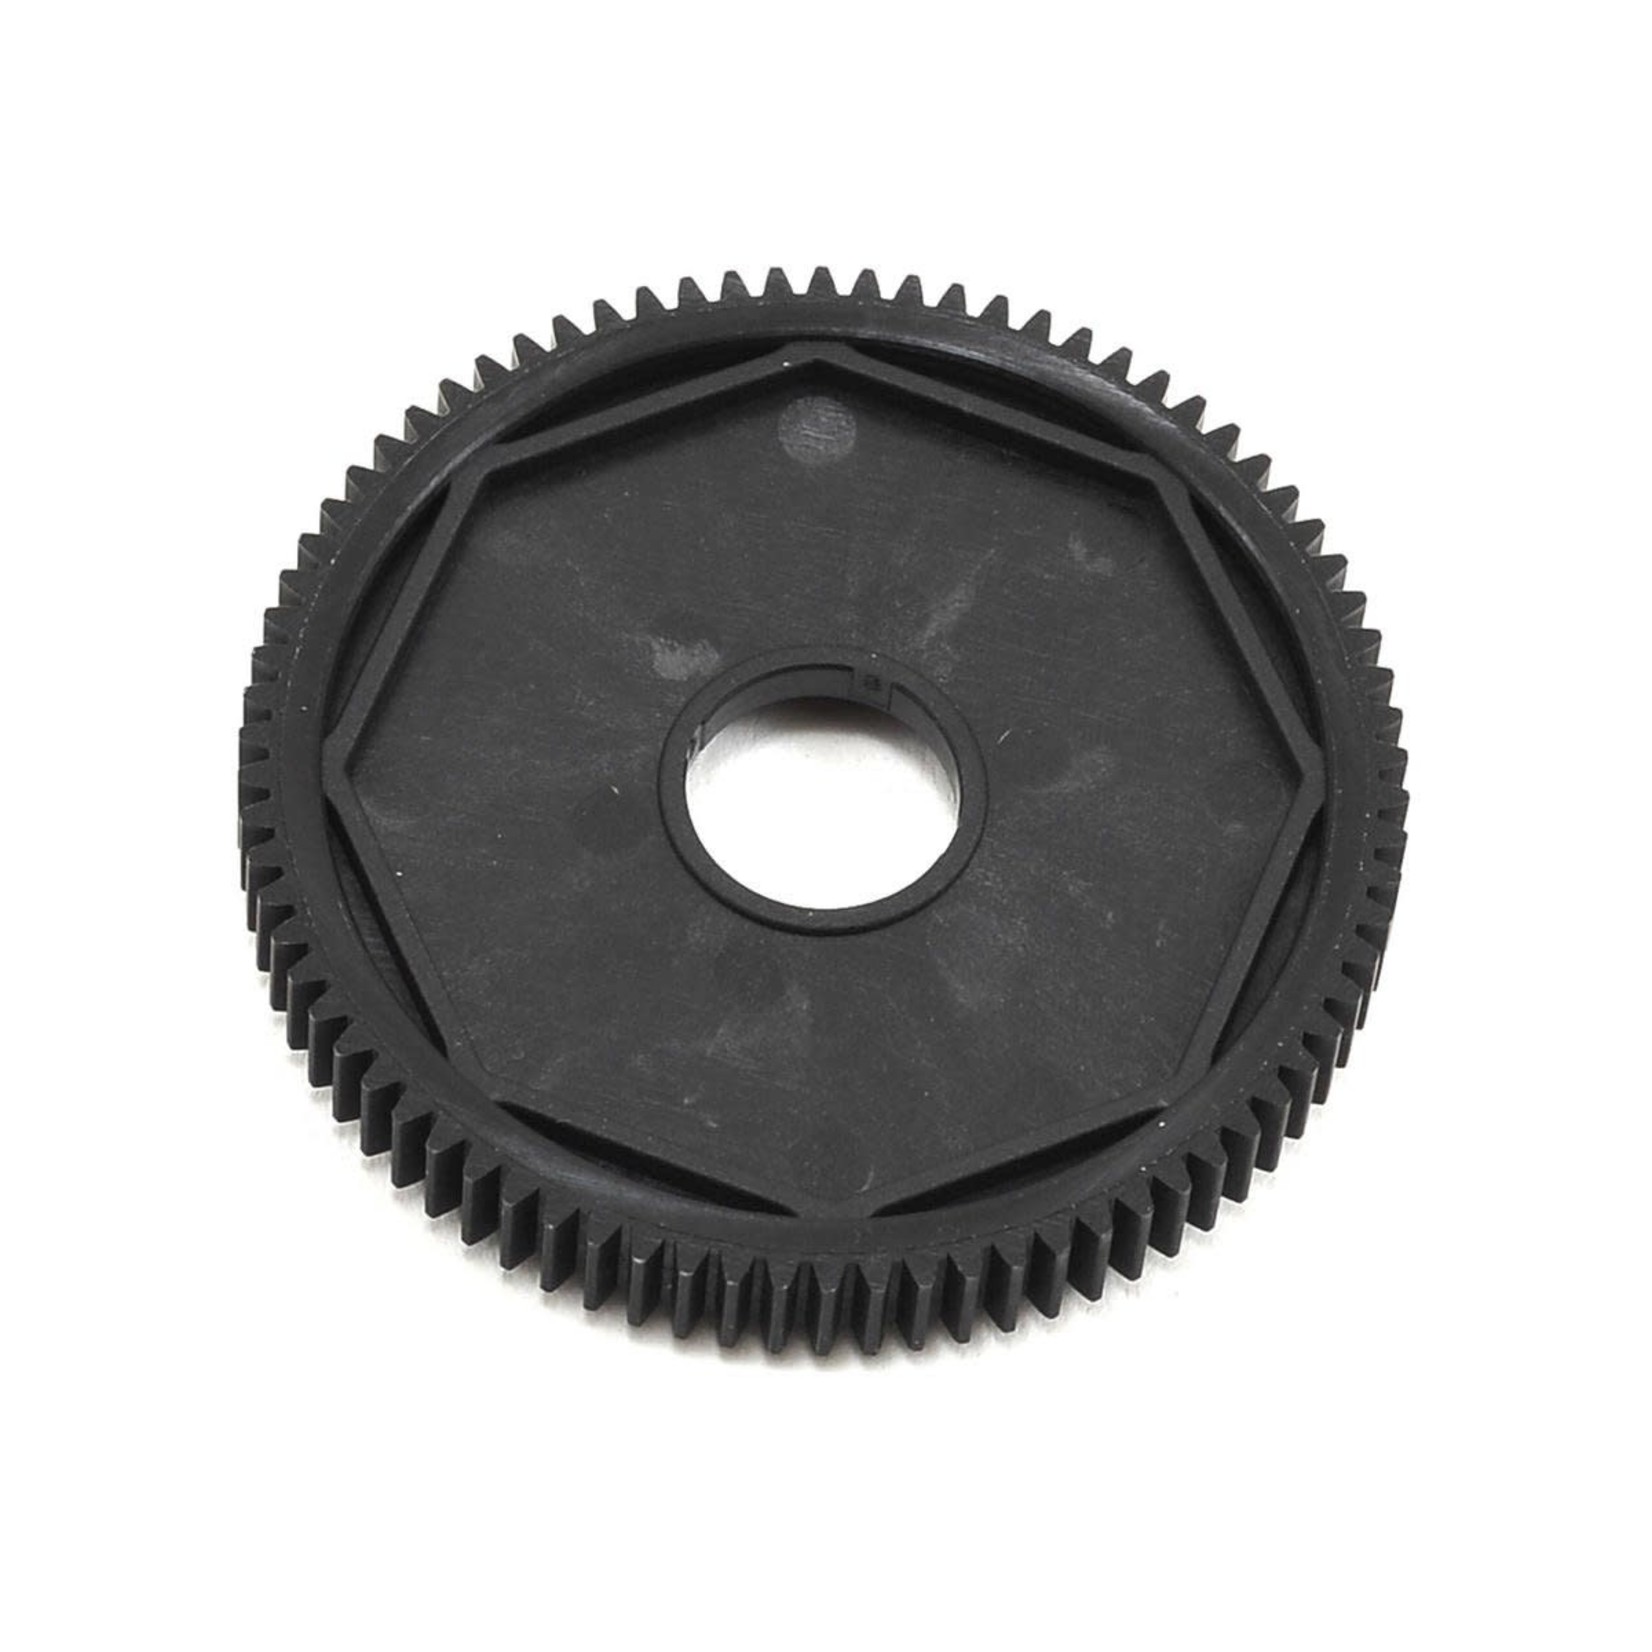 XRAY XRAY Composite 48P 3-Pad Slipper Clutch Spur Gear (78T) #365878